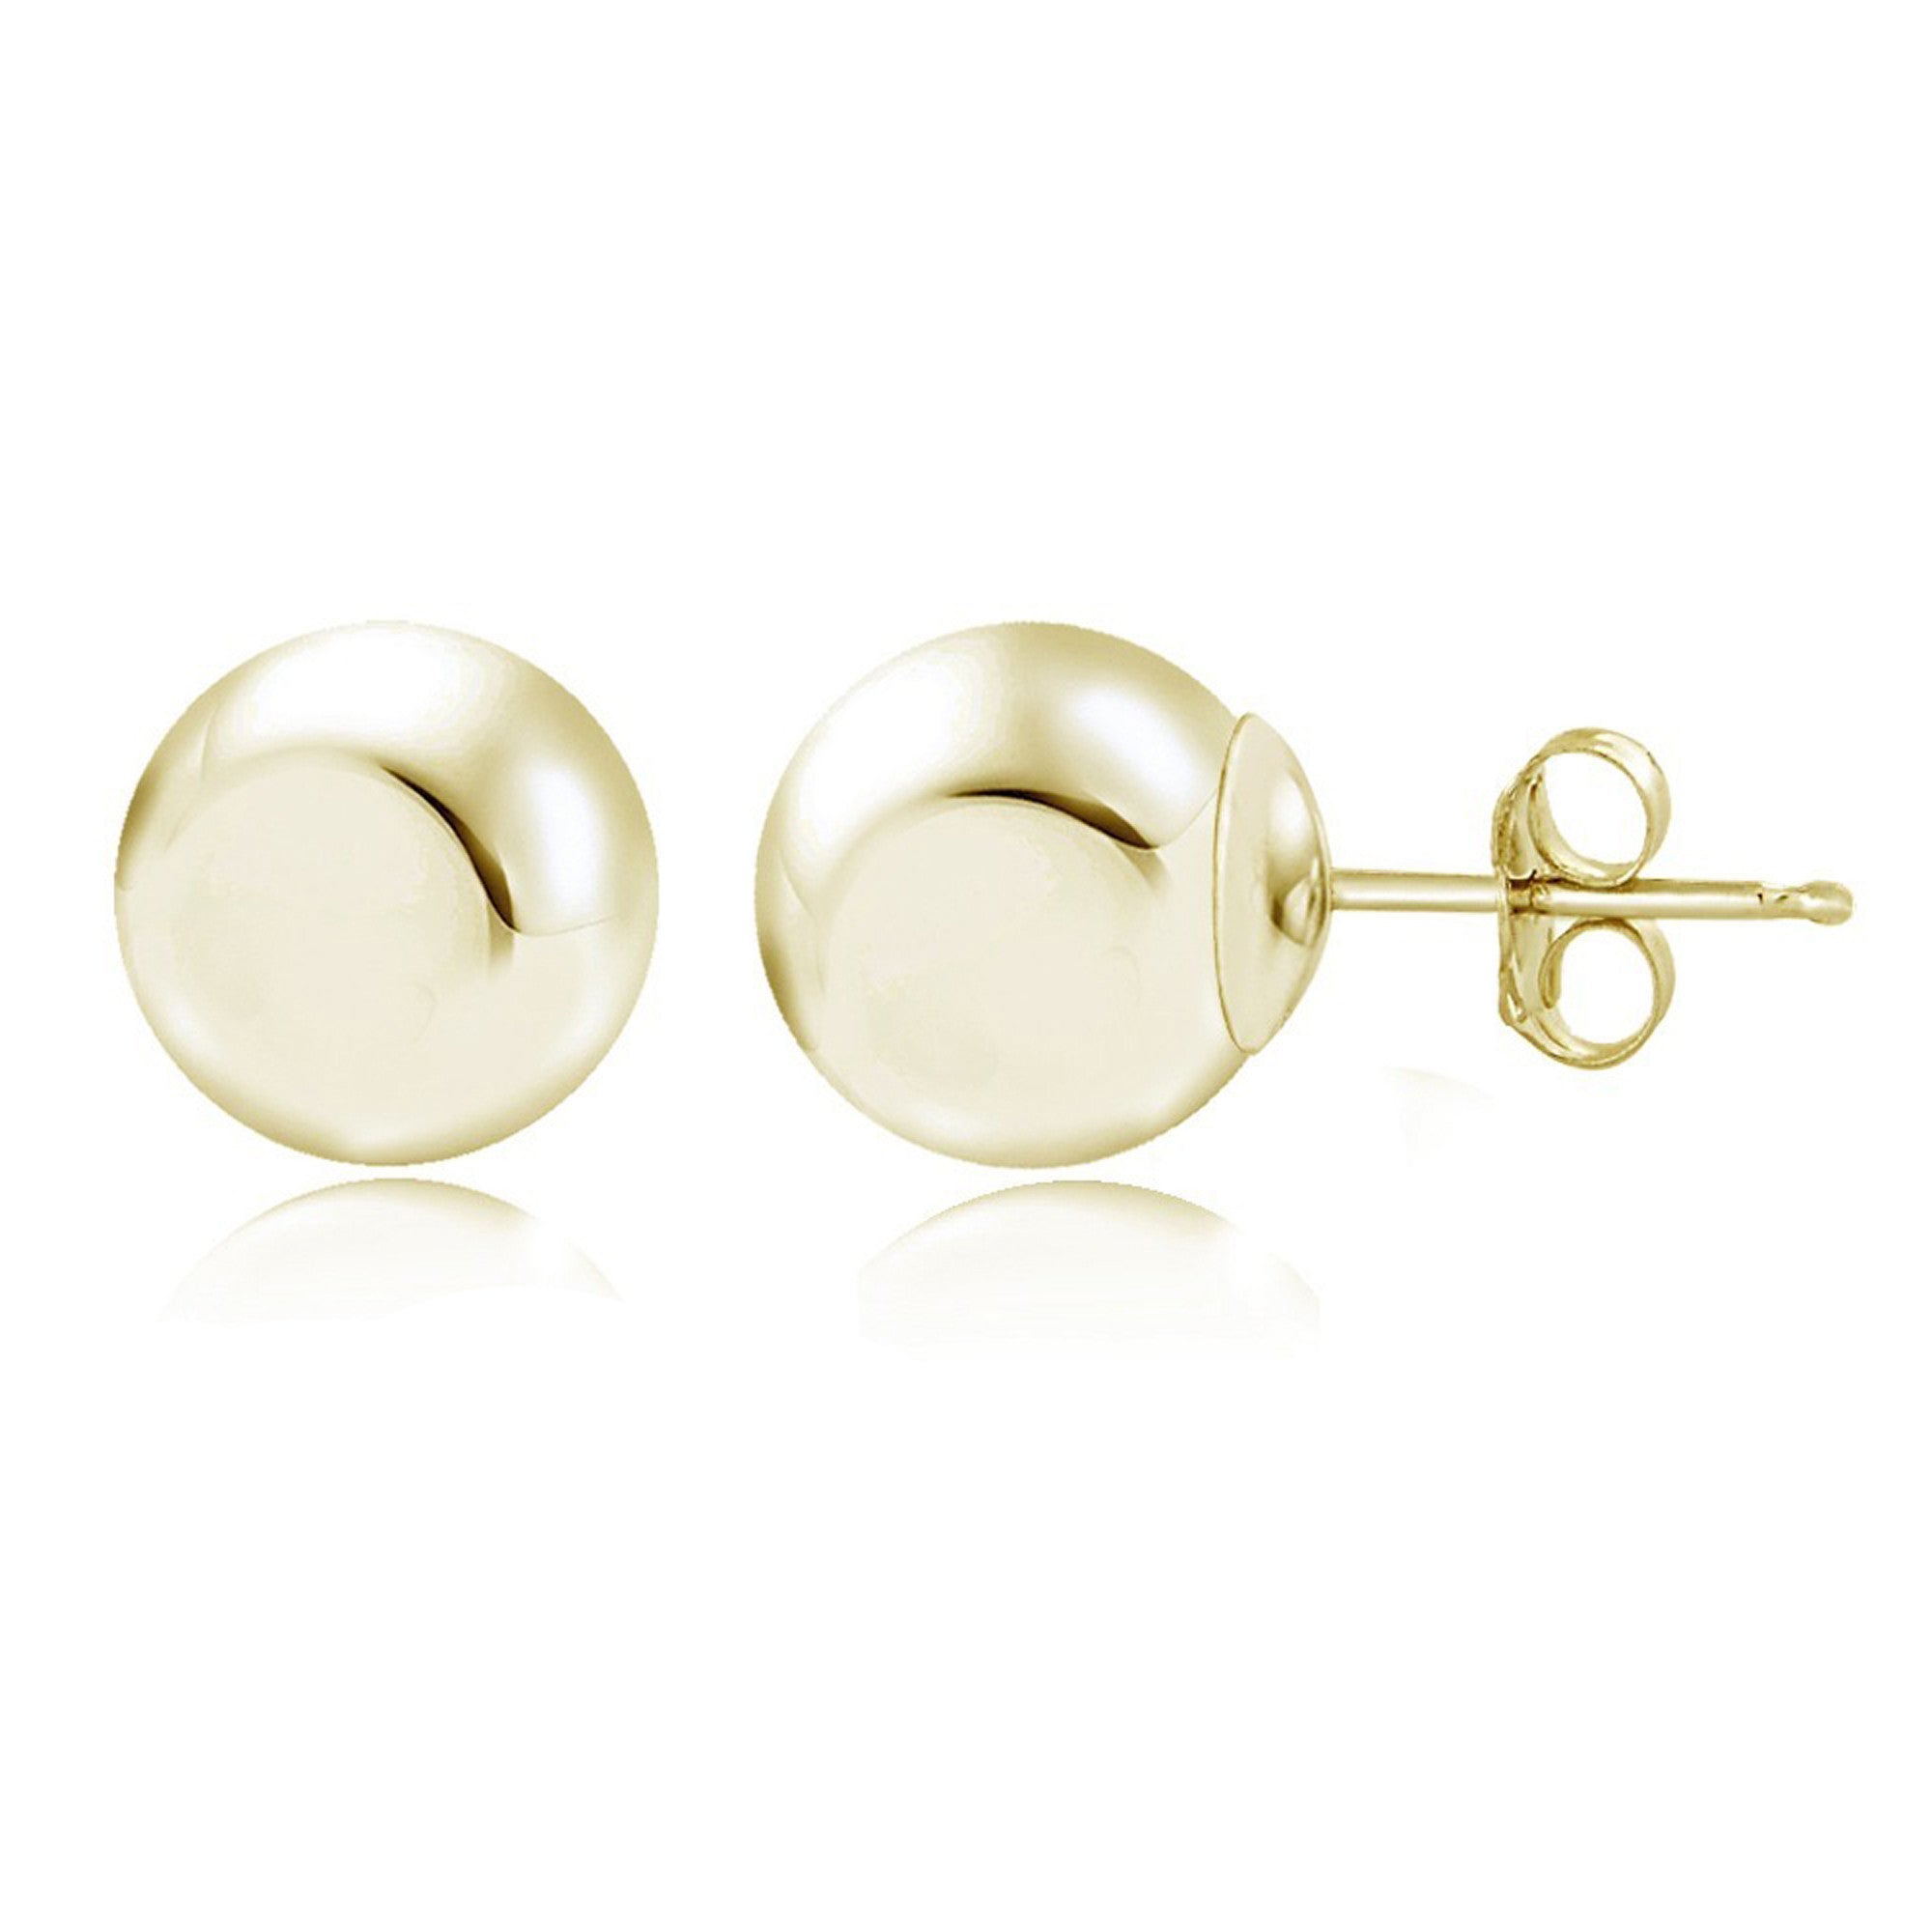 Round Ball Butterfly Clasp Stud Earrings - 4mm Yellow Gold